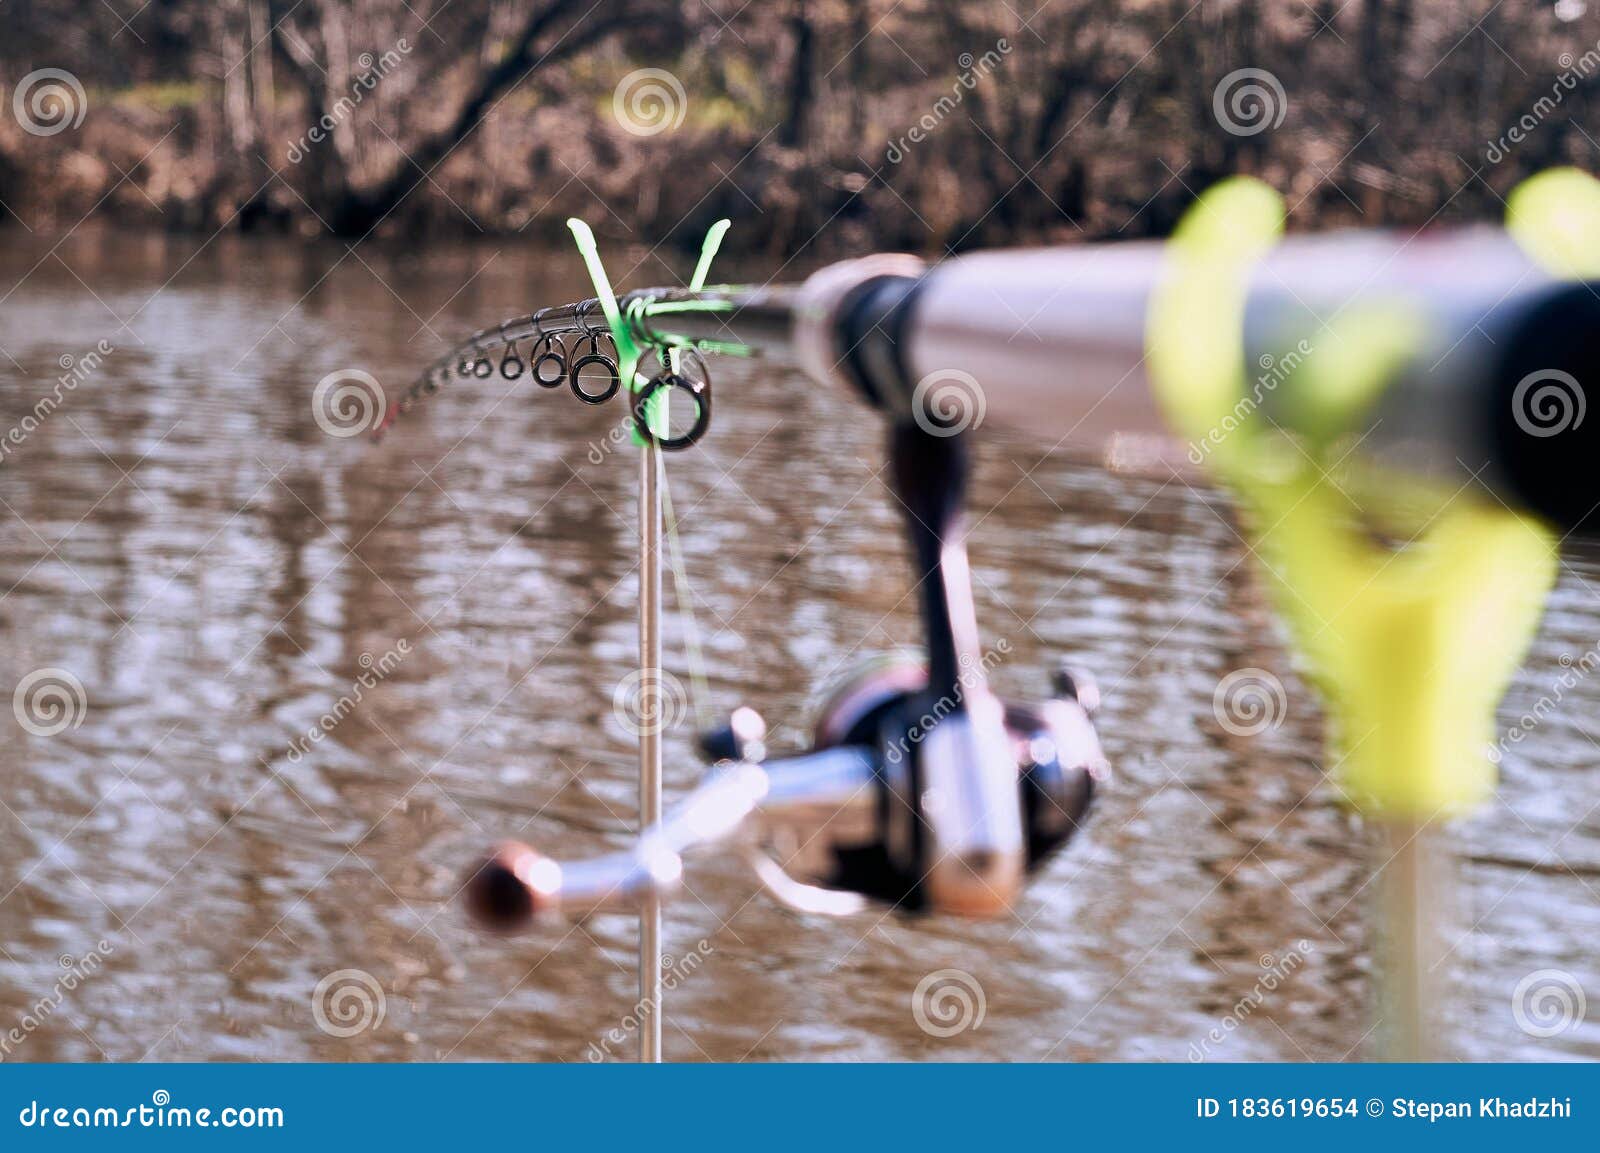 https://thumbs.dreamstime.com/z/feeder-fishing-rod-stand-against-background-river-closeup-183619654.jpg